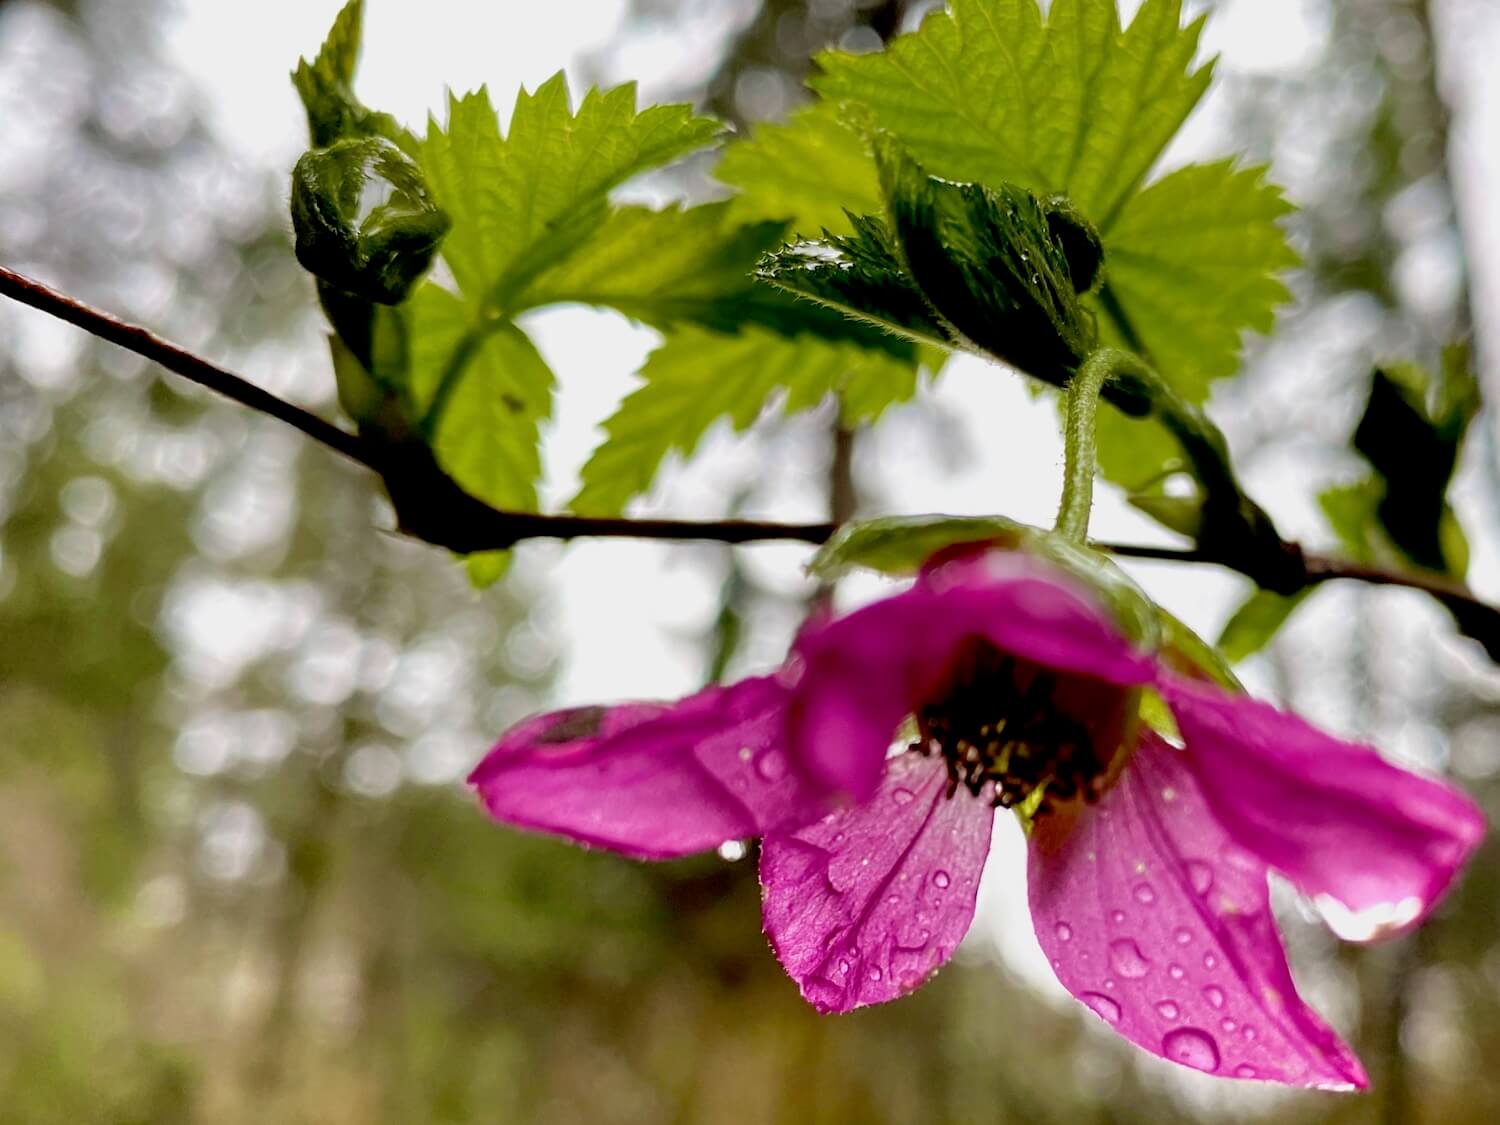 The purple flower of this salmonberry plant can barely hold the heavy droplets of rain still on the frail petals. The blossom clings to a branch that is still working to produce fresh leaves, which are light green with jagged edges.